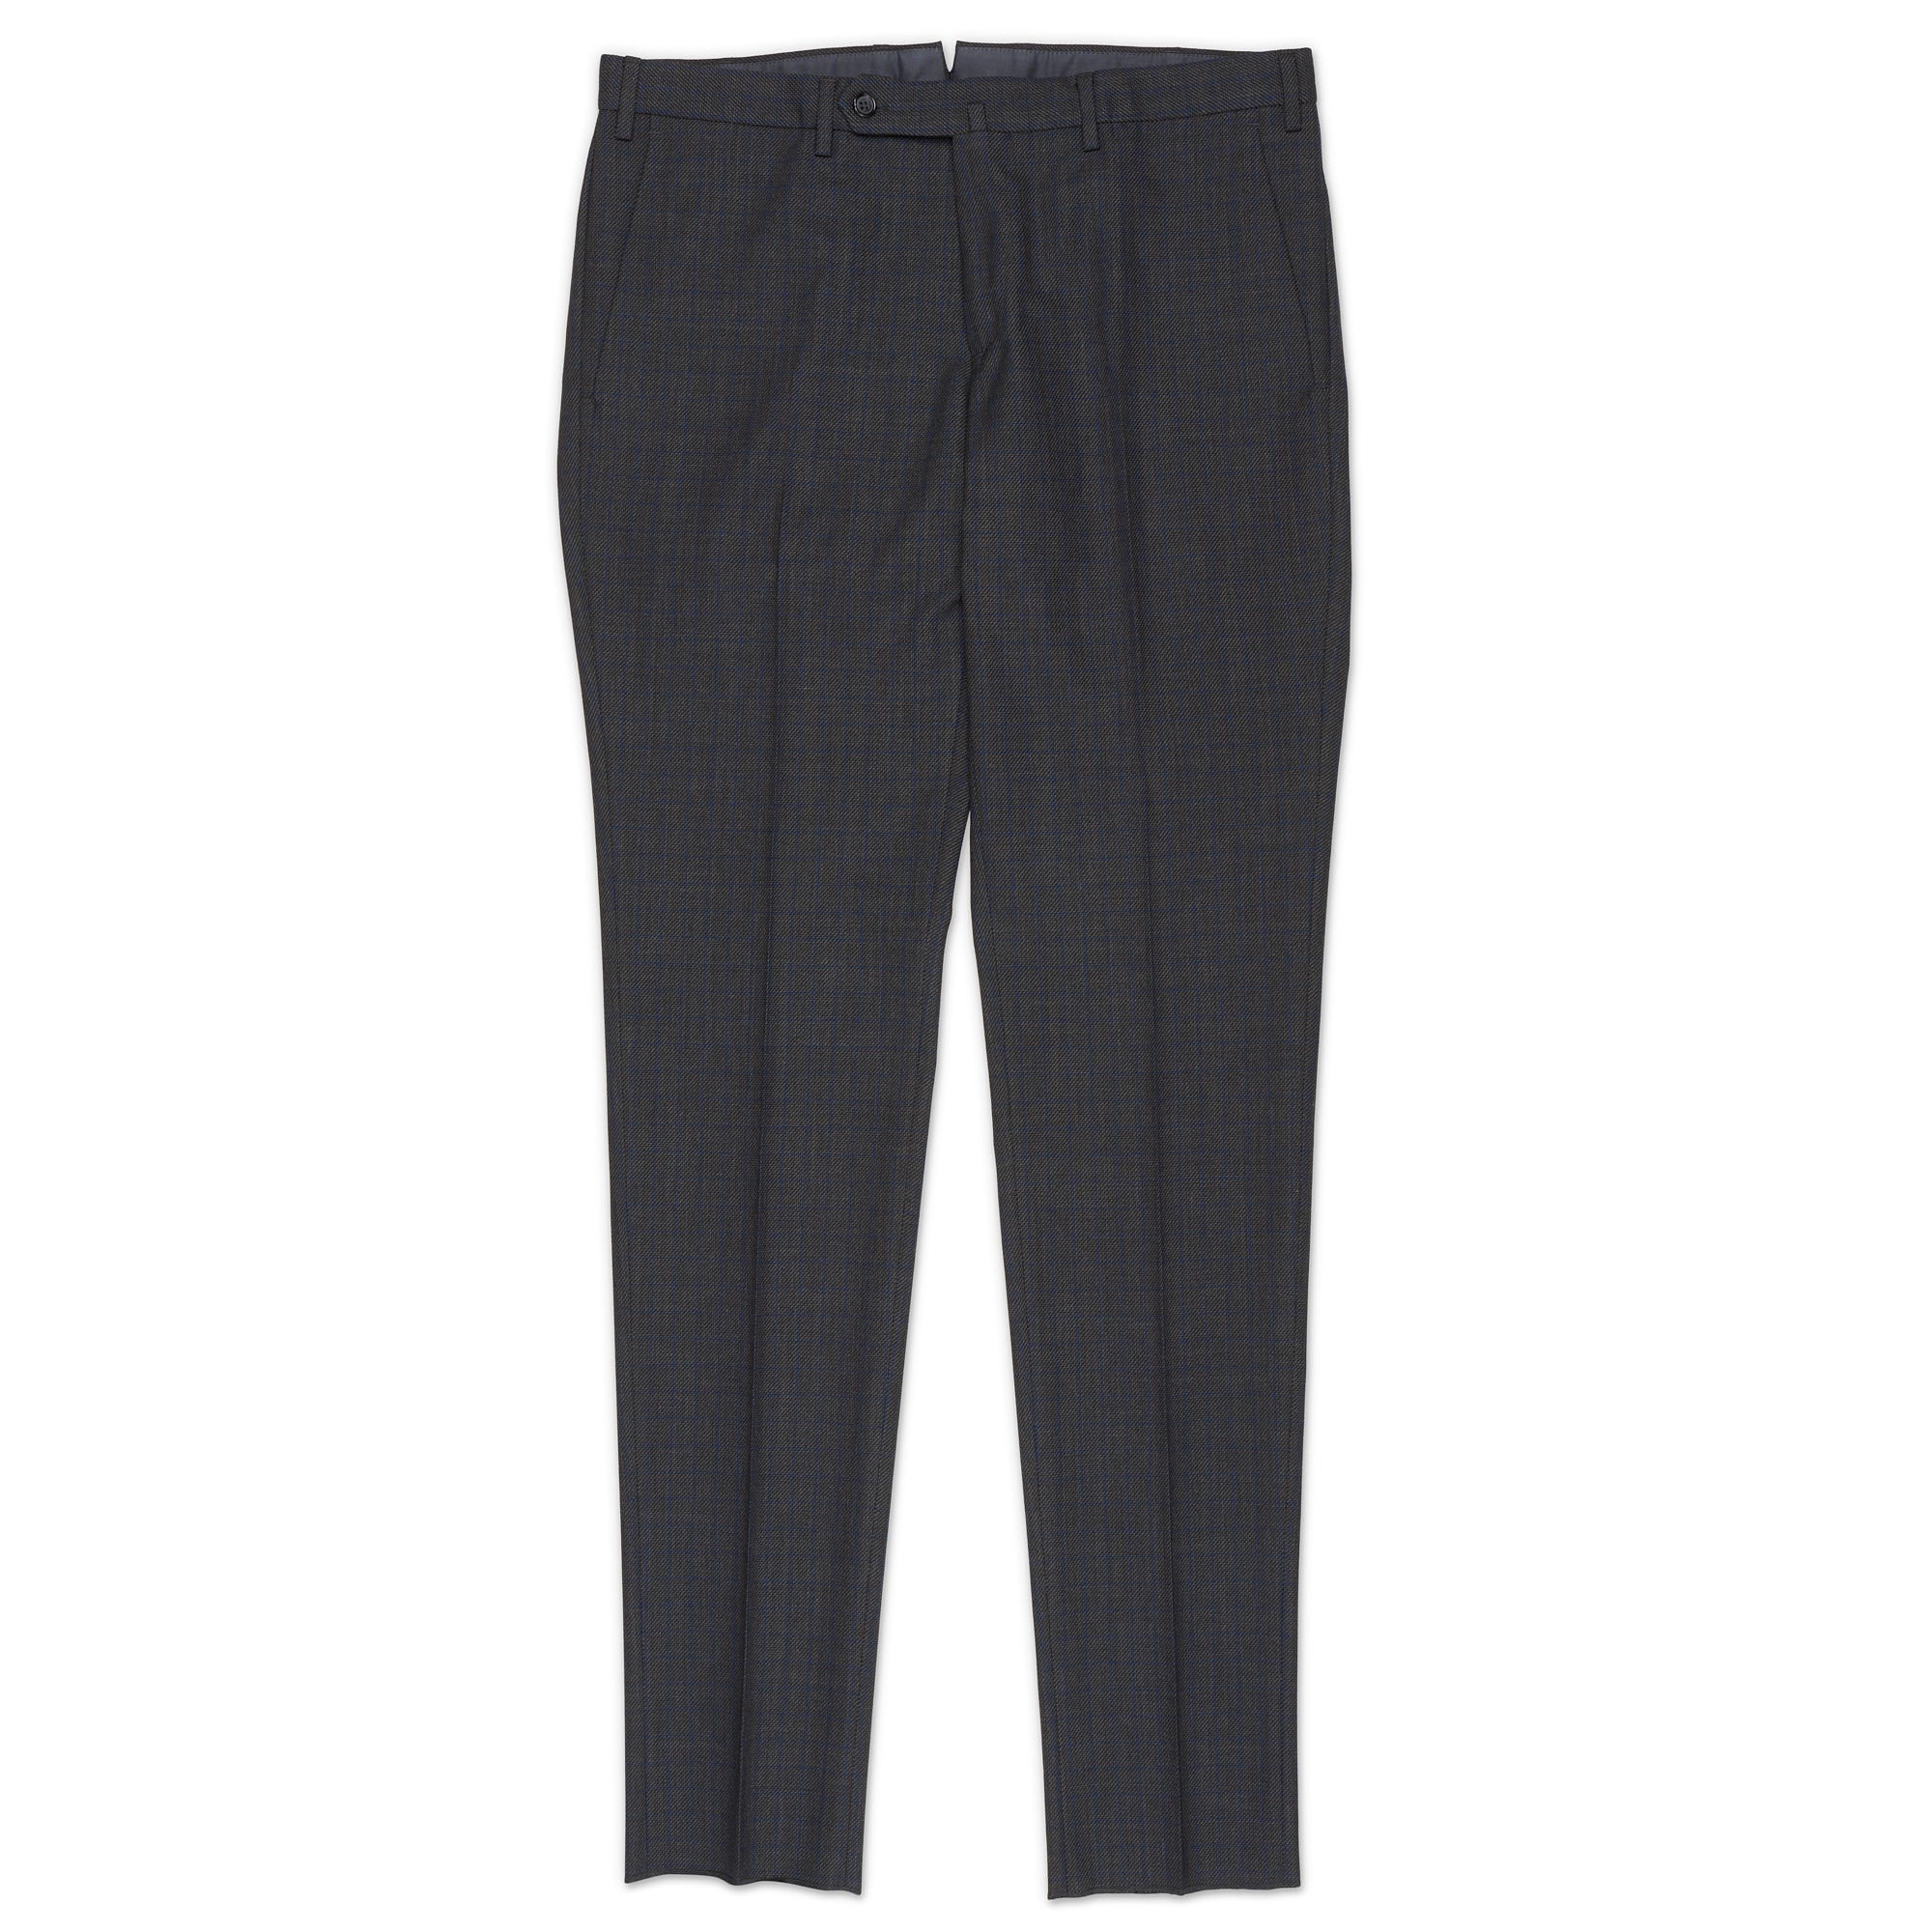 INCOTEX (Slowear) Gray Checked Cotton-Wool Flat Front Pants NEW Slim Fit